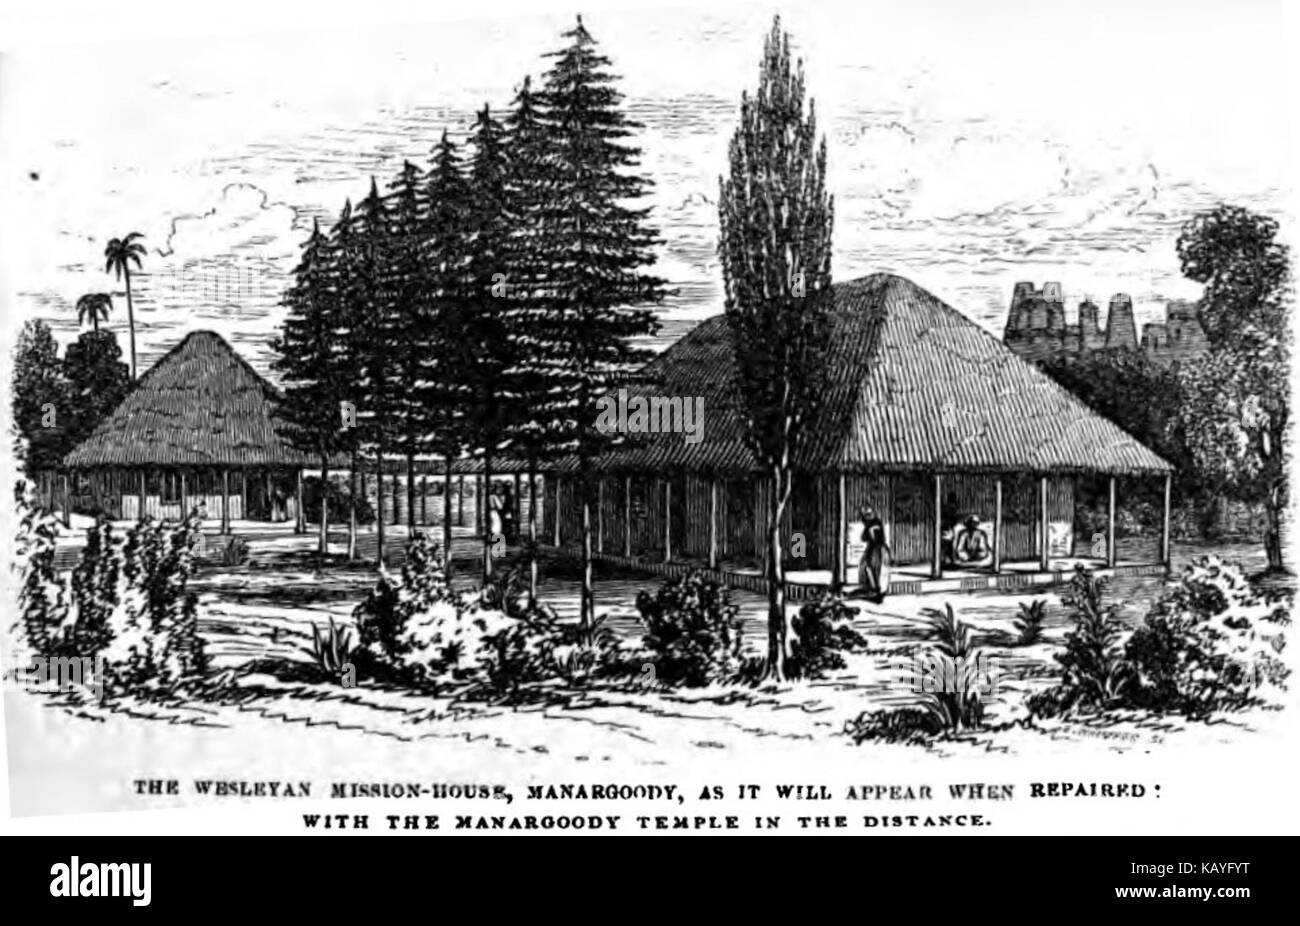 The Wesleyan Mission House, Manargoody, as it will appear when repaired, with the Manargoody Temple in the distance (November 1855, p.120, Rev. Thomas Hodson)   Copy Stock Photo